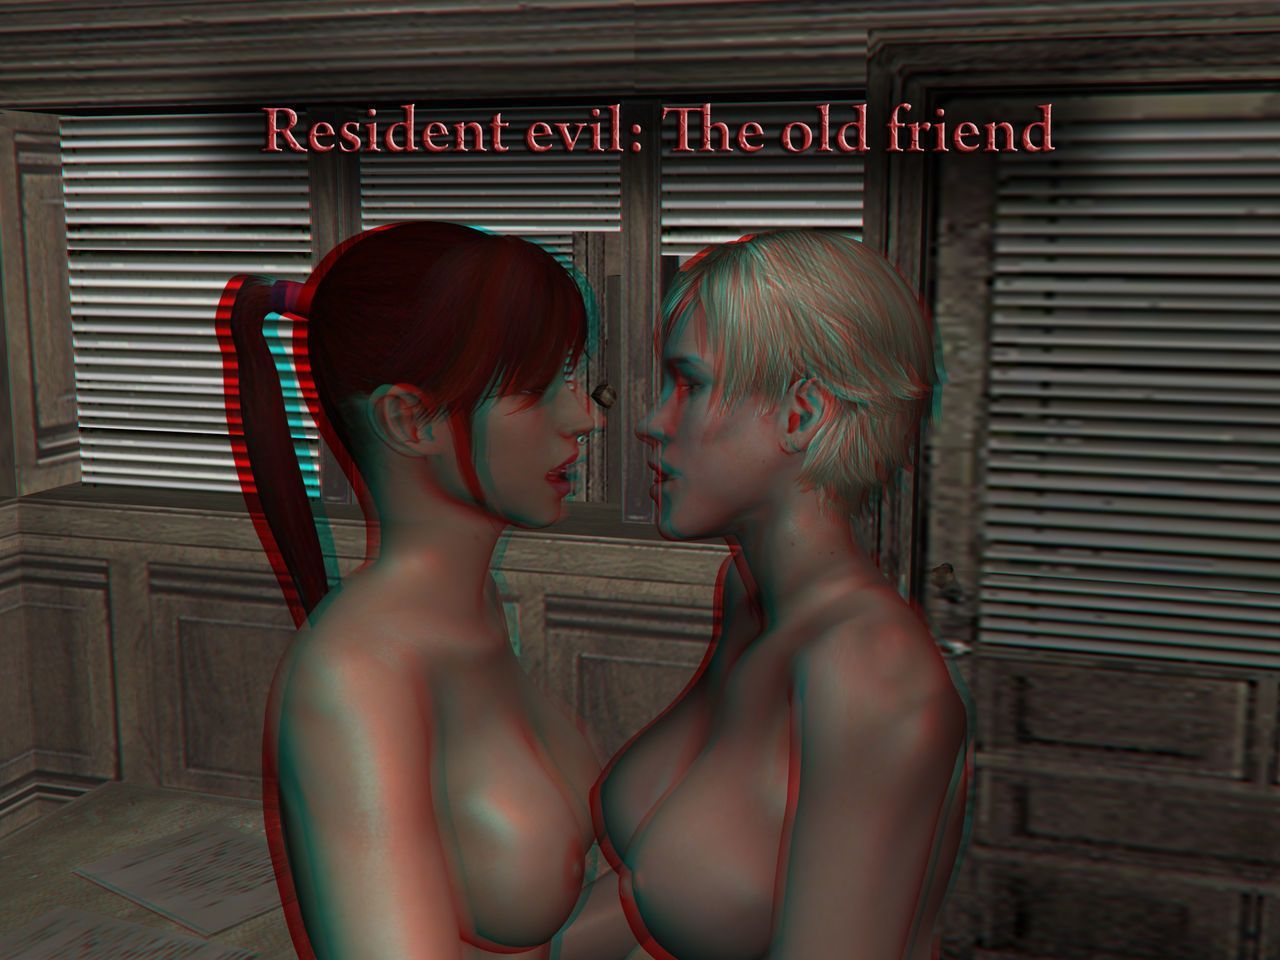 Resident evil: The old friend - part 2